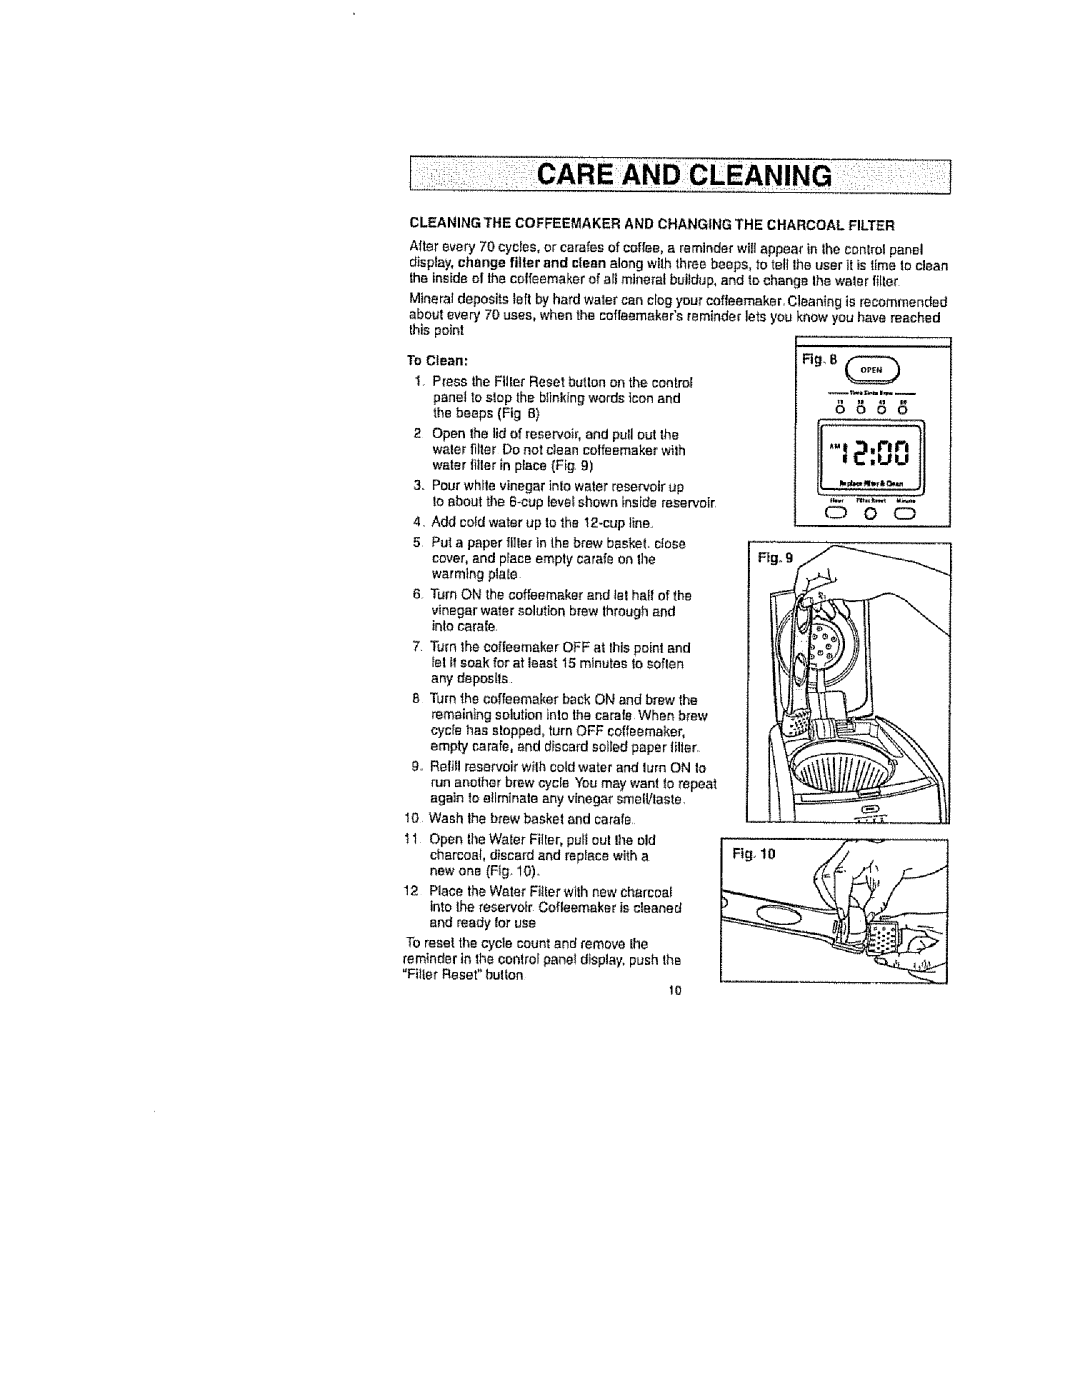 Kenmore 100.90007 operating instructions I , ¢1rl, g6t, o CD, To Clean, water filter inplace Fig 